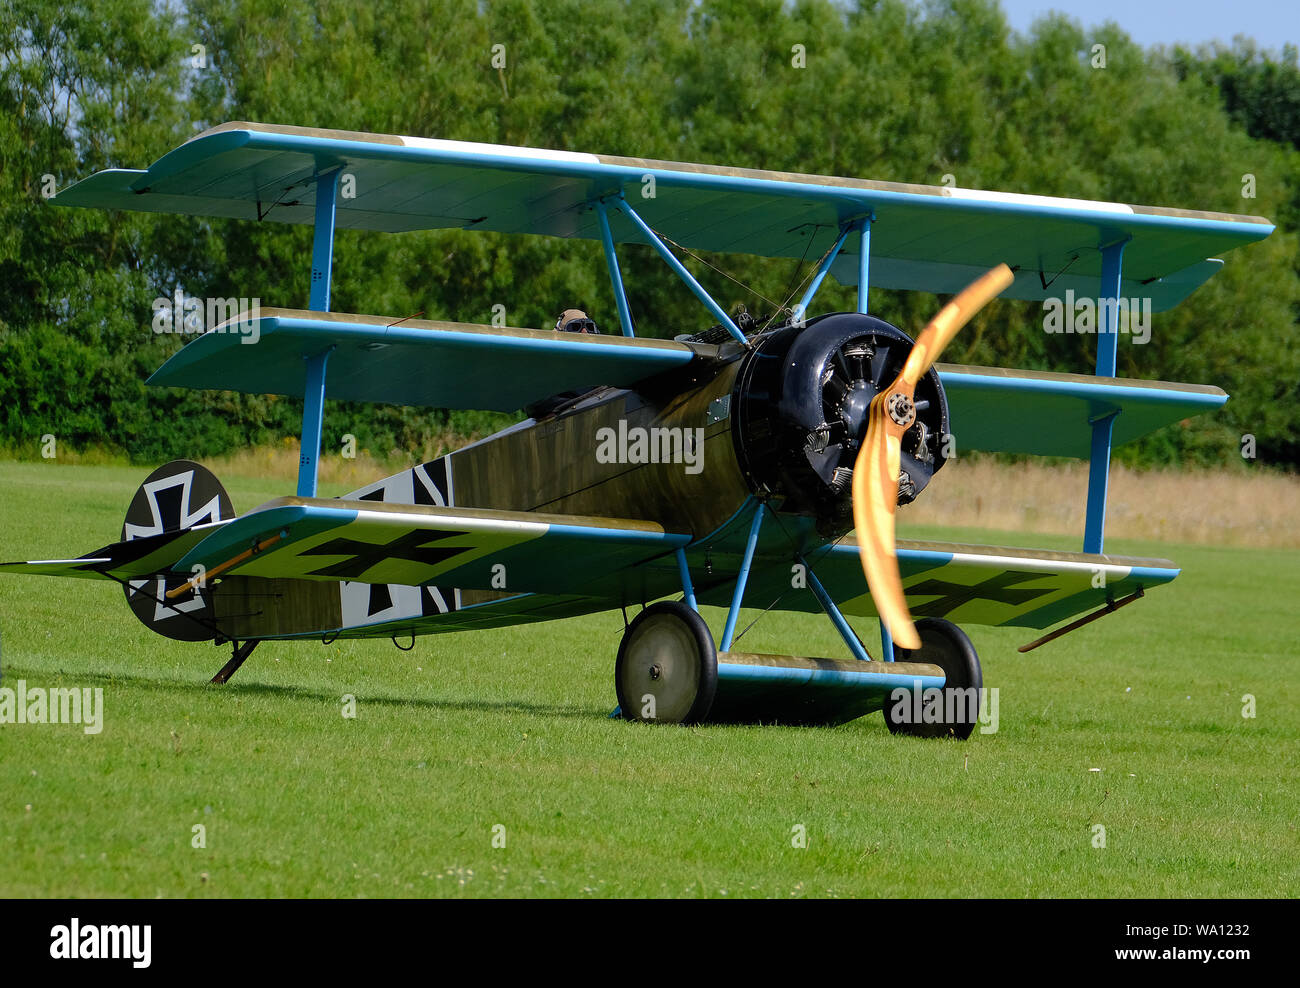 The Fokker Dr.I, (replica) often known simply as the Fokker Triplane, was a World War I fighter aircraft built by Fokker-Flugzeugwerke. Stock Photo